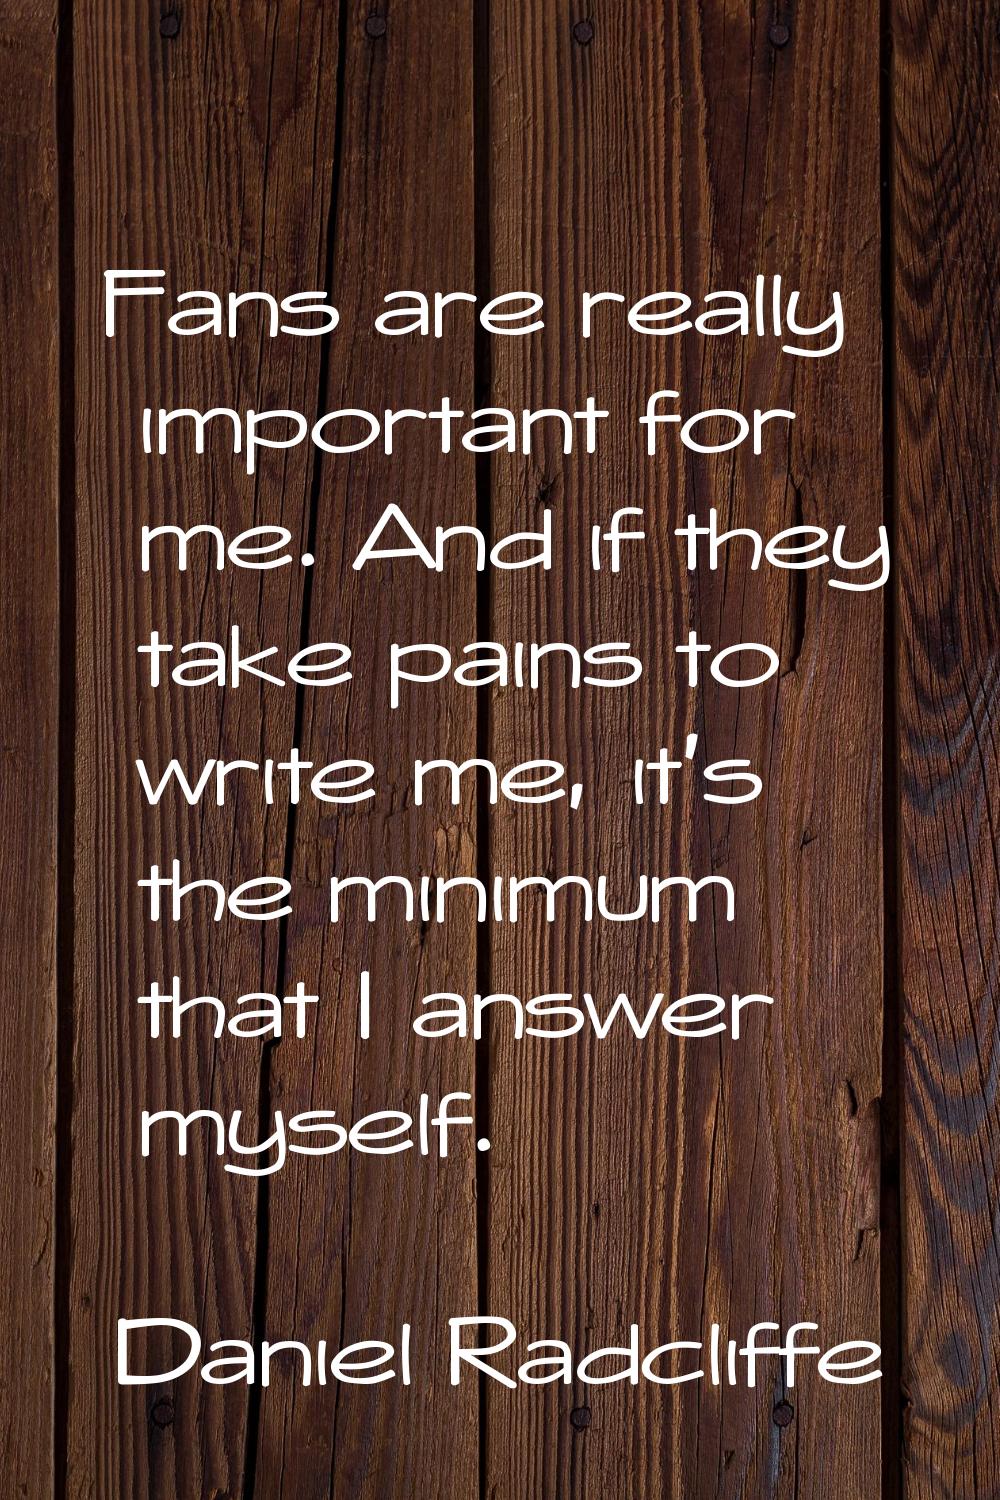 Fans are really important for me. And if they take pains to write me, it's the minimum that I answe